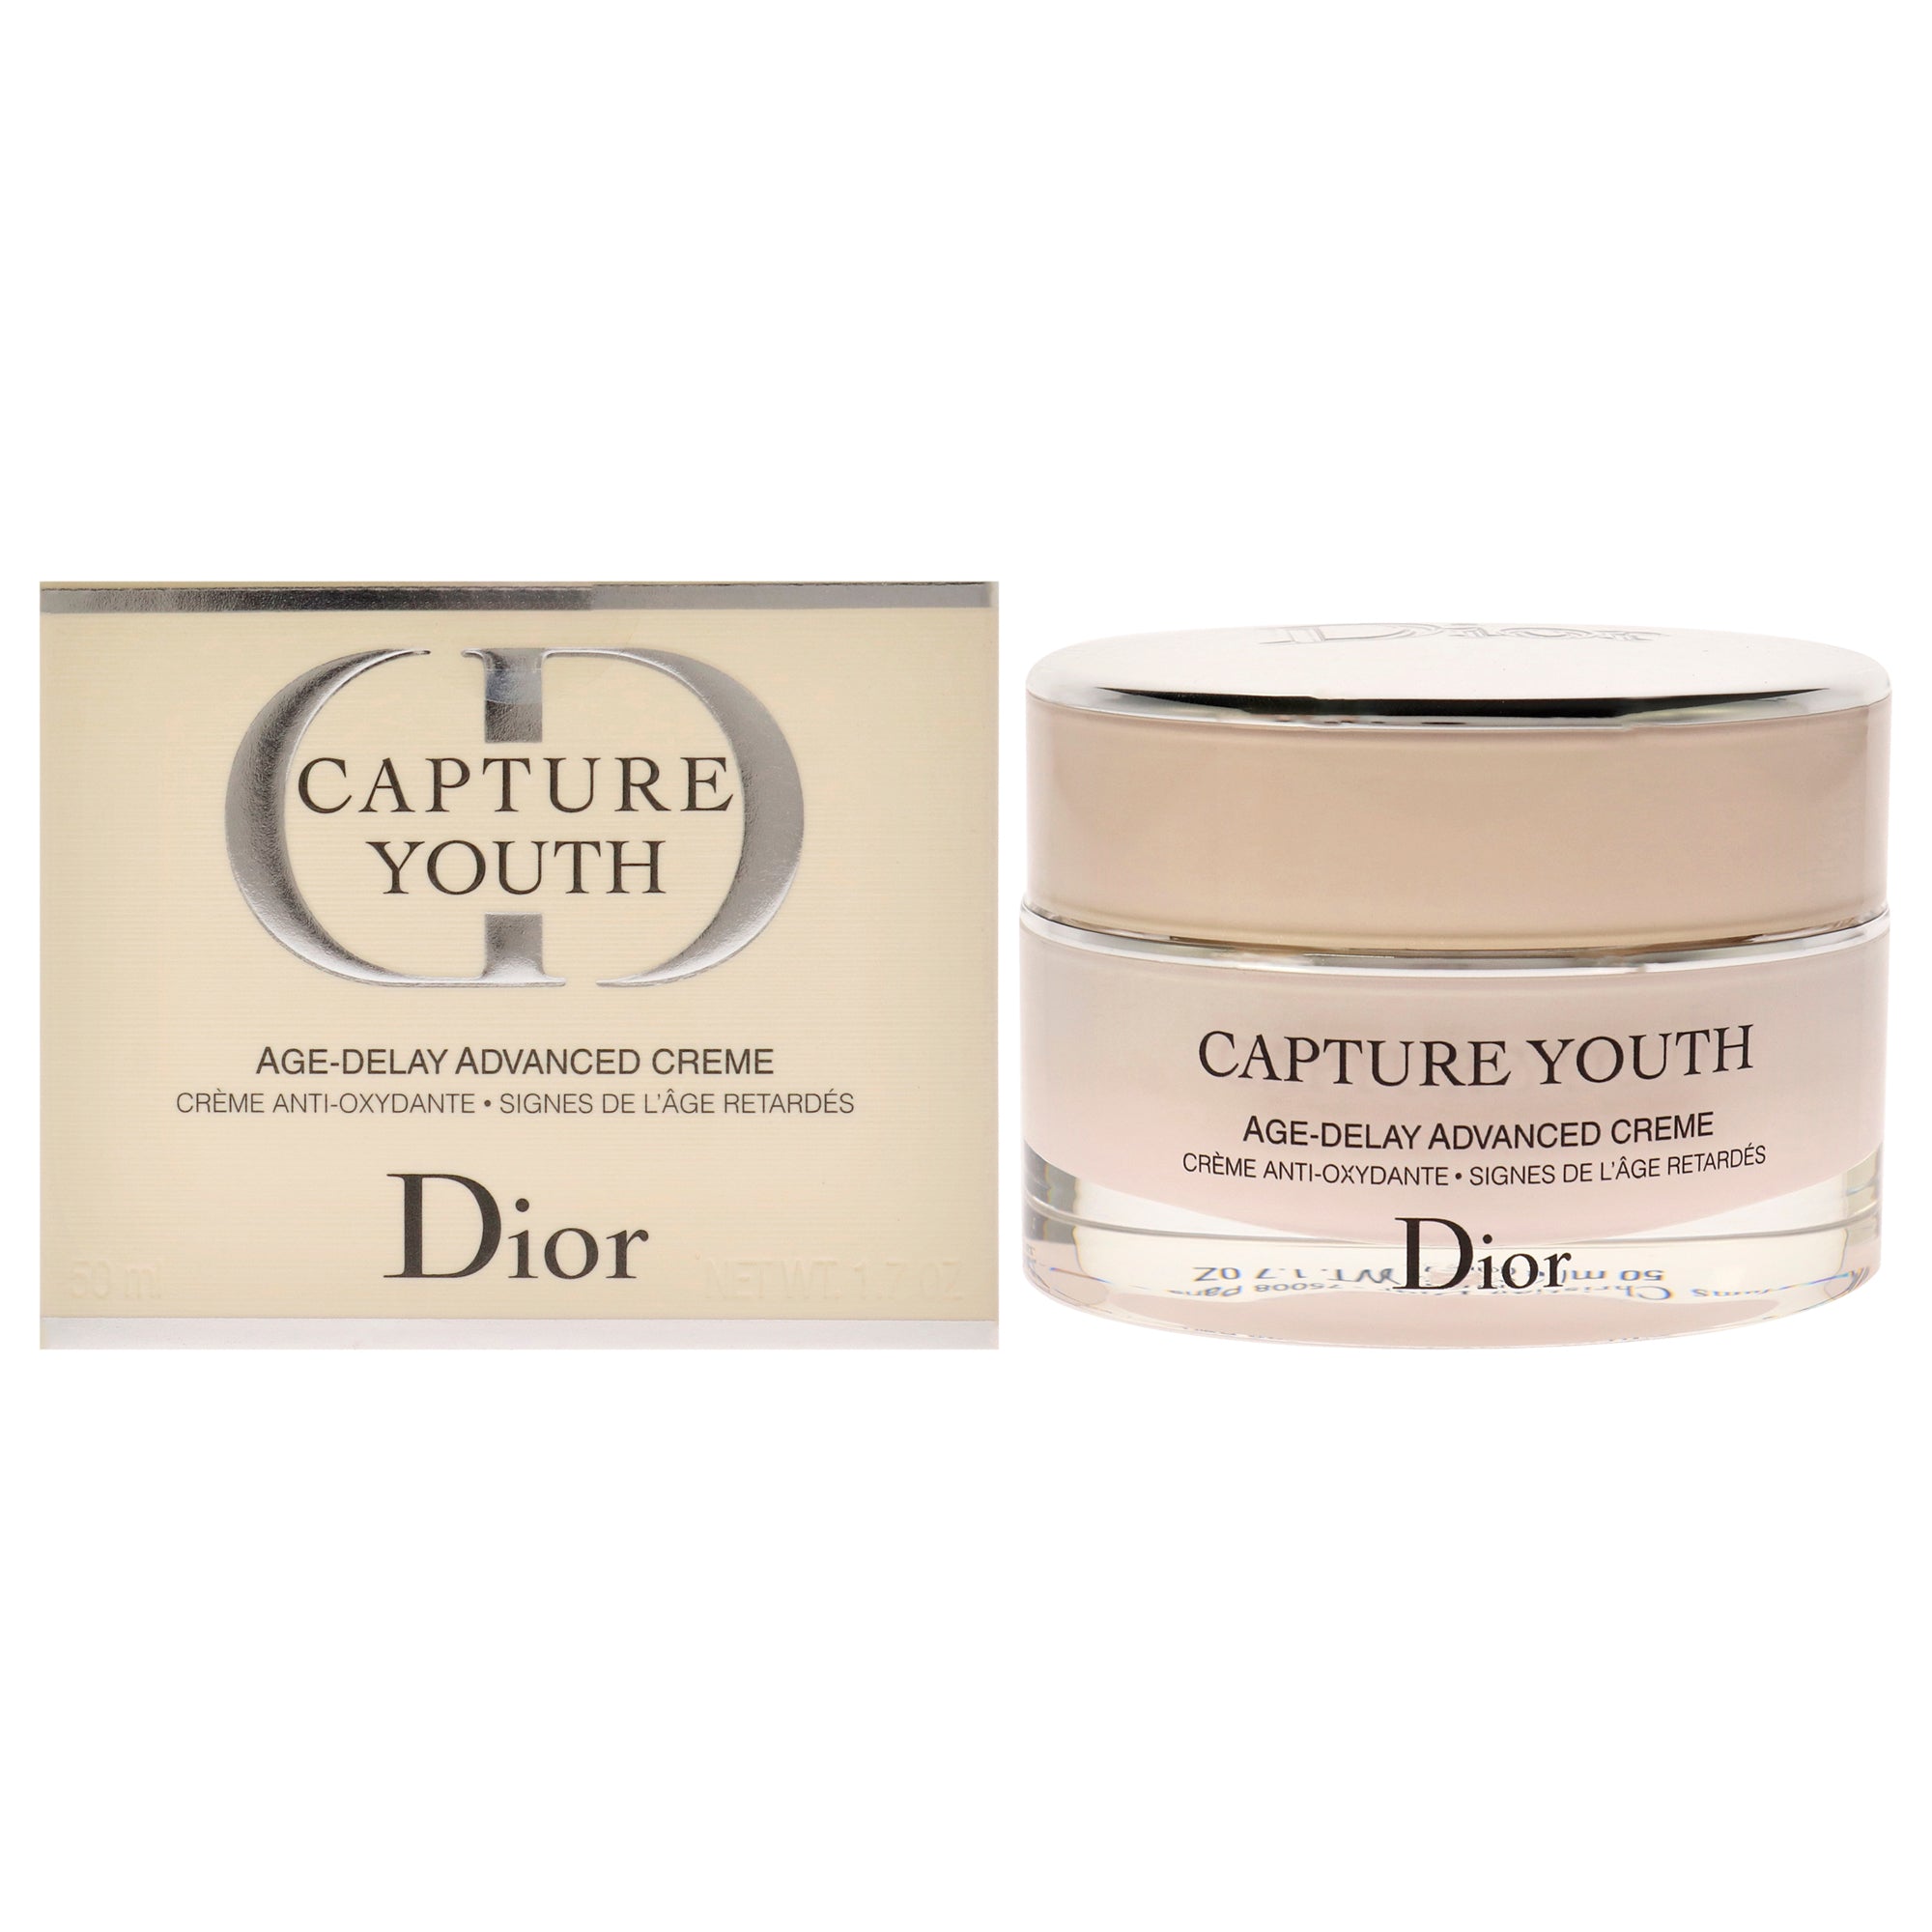 Capture Youth Age-Delay Advanced Cream by Christian Dior for Women - 1.7 oz Cream